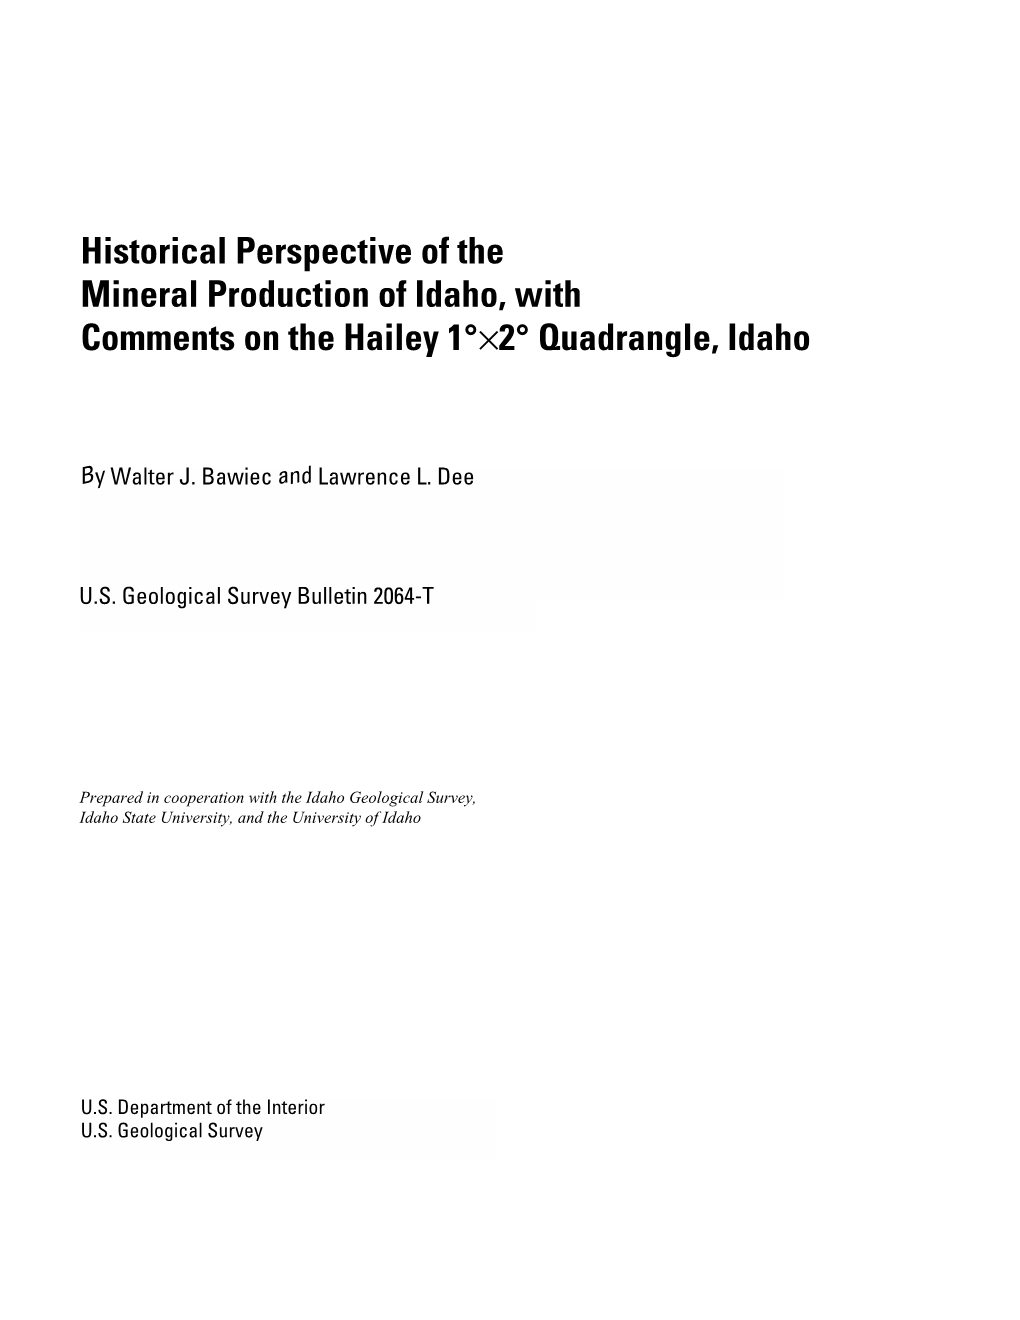 Historical Perspective of the Mineral Production of Idaho, with Comments on the Hailey 1°×2° Quadrangle, Idaho